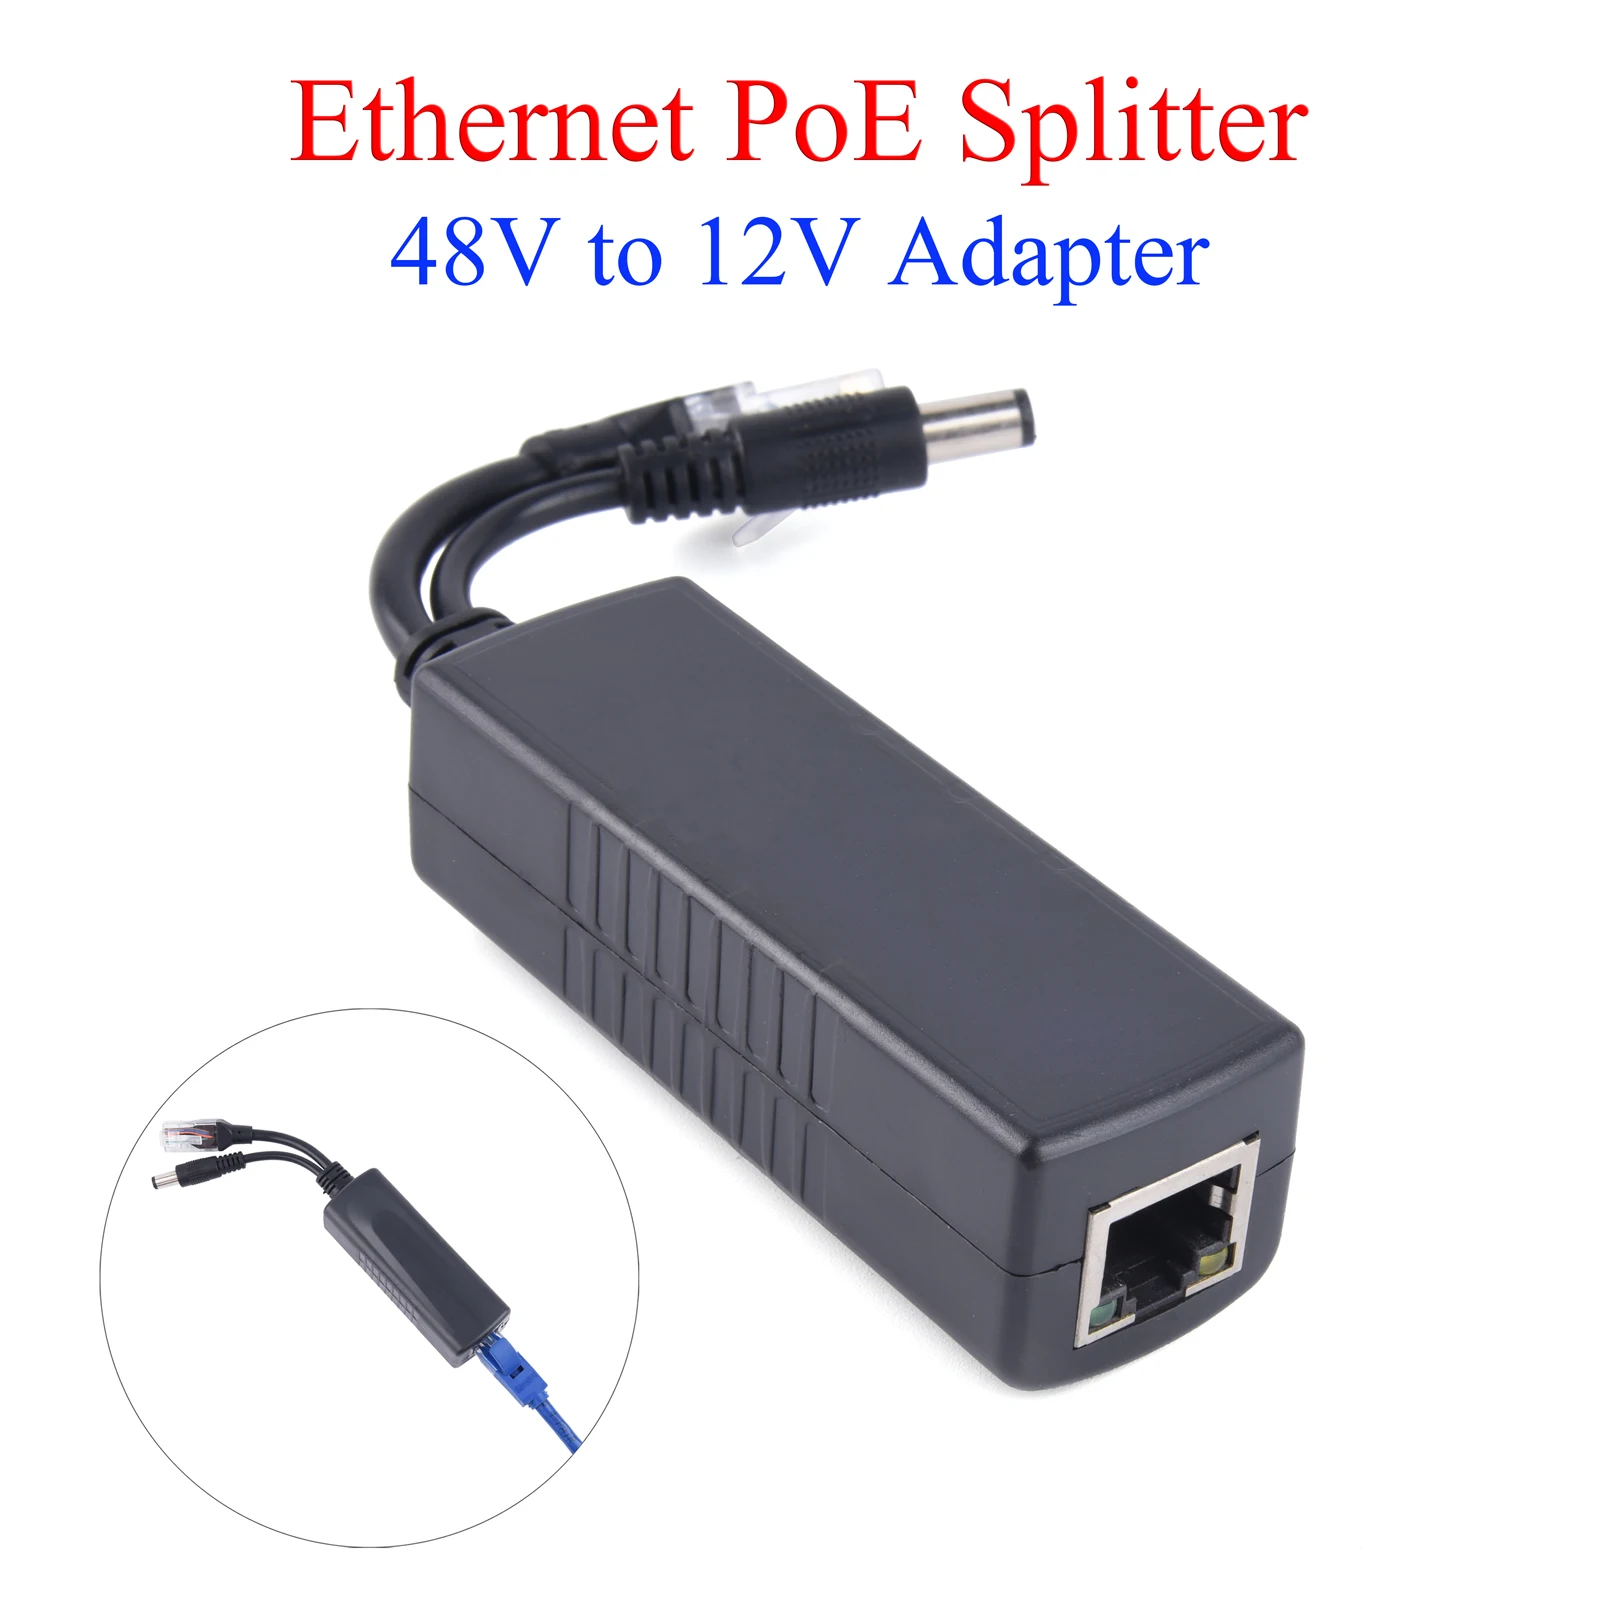 

48V to 12V POE Splitter 10/100M IEEE802.3af/at Standard Ethernet Connectors Adapter Power Supply Module Cable For IP Camera